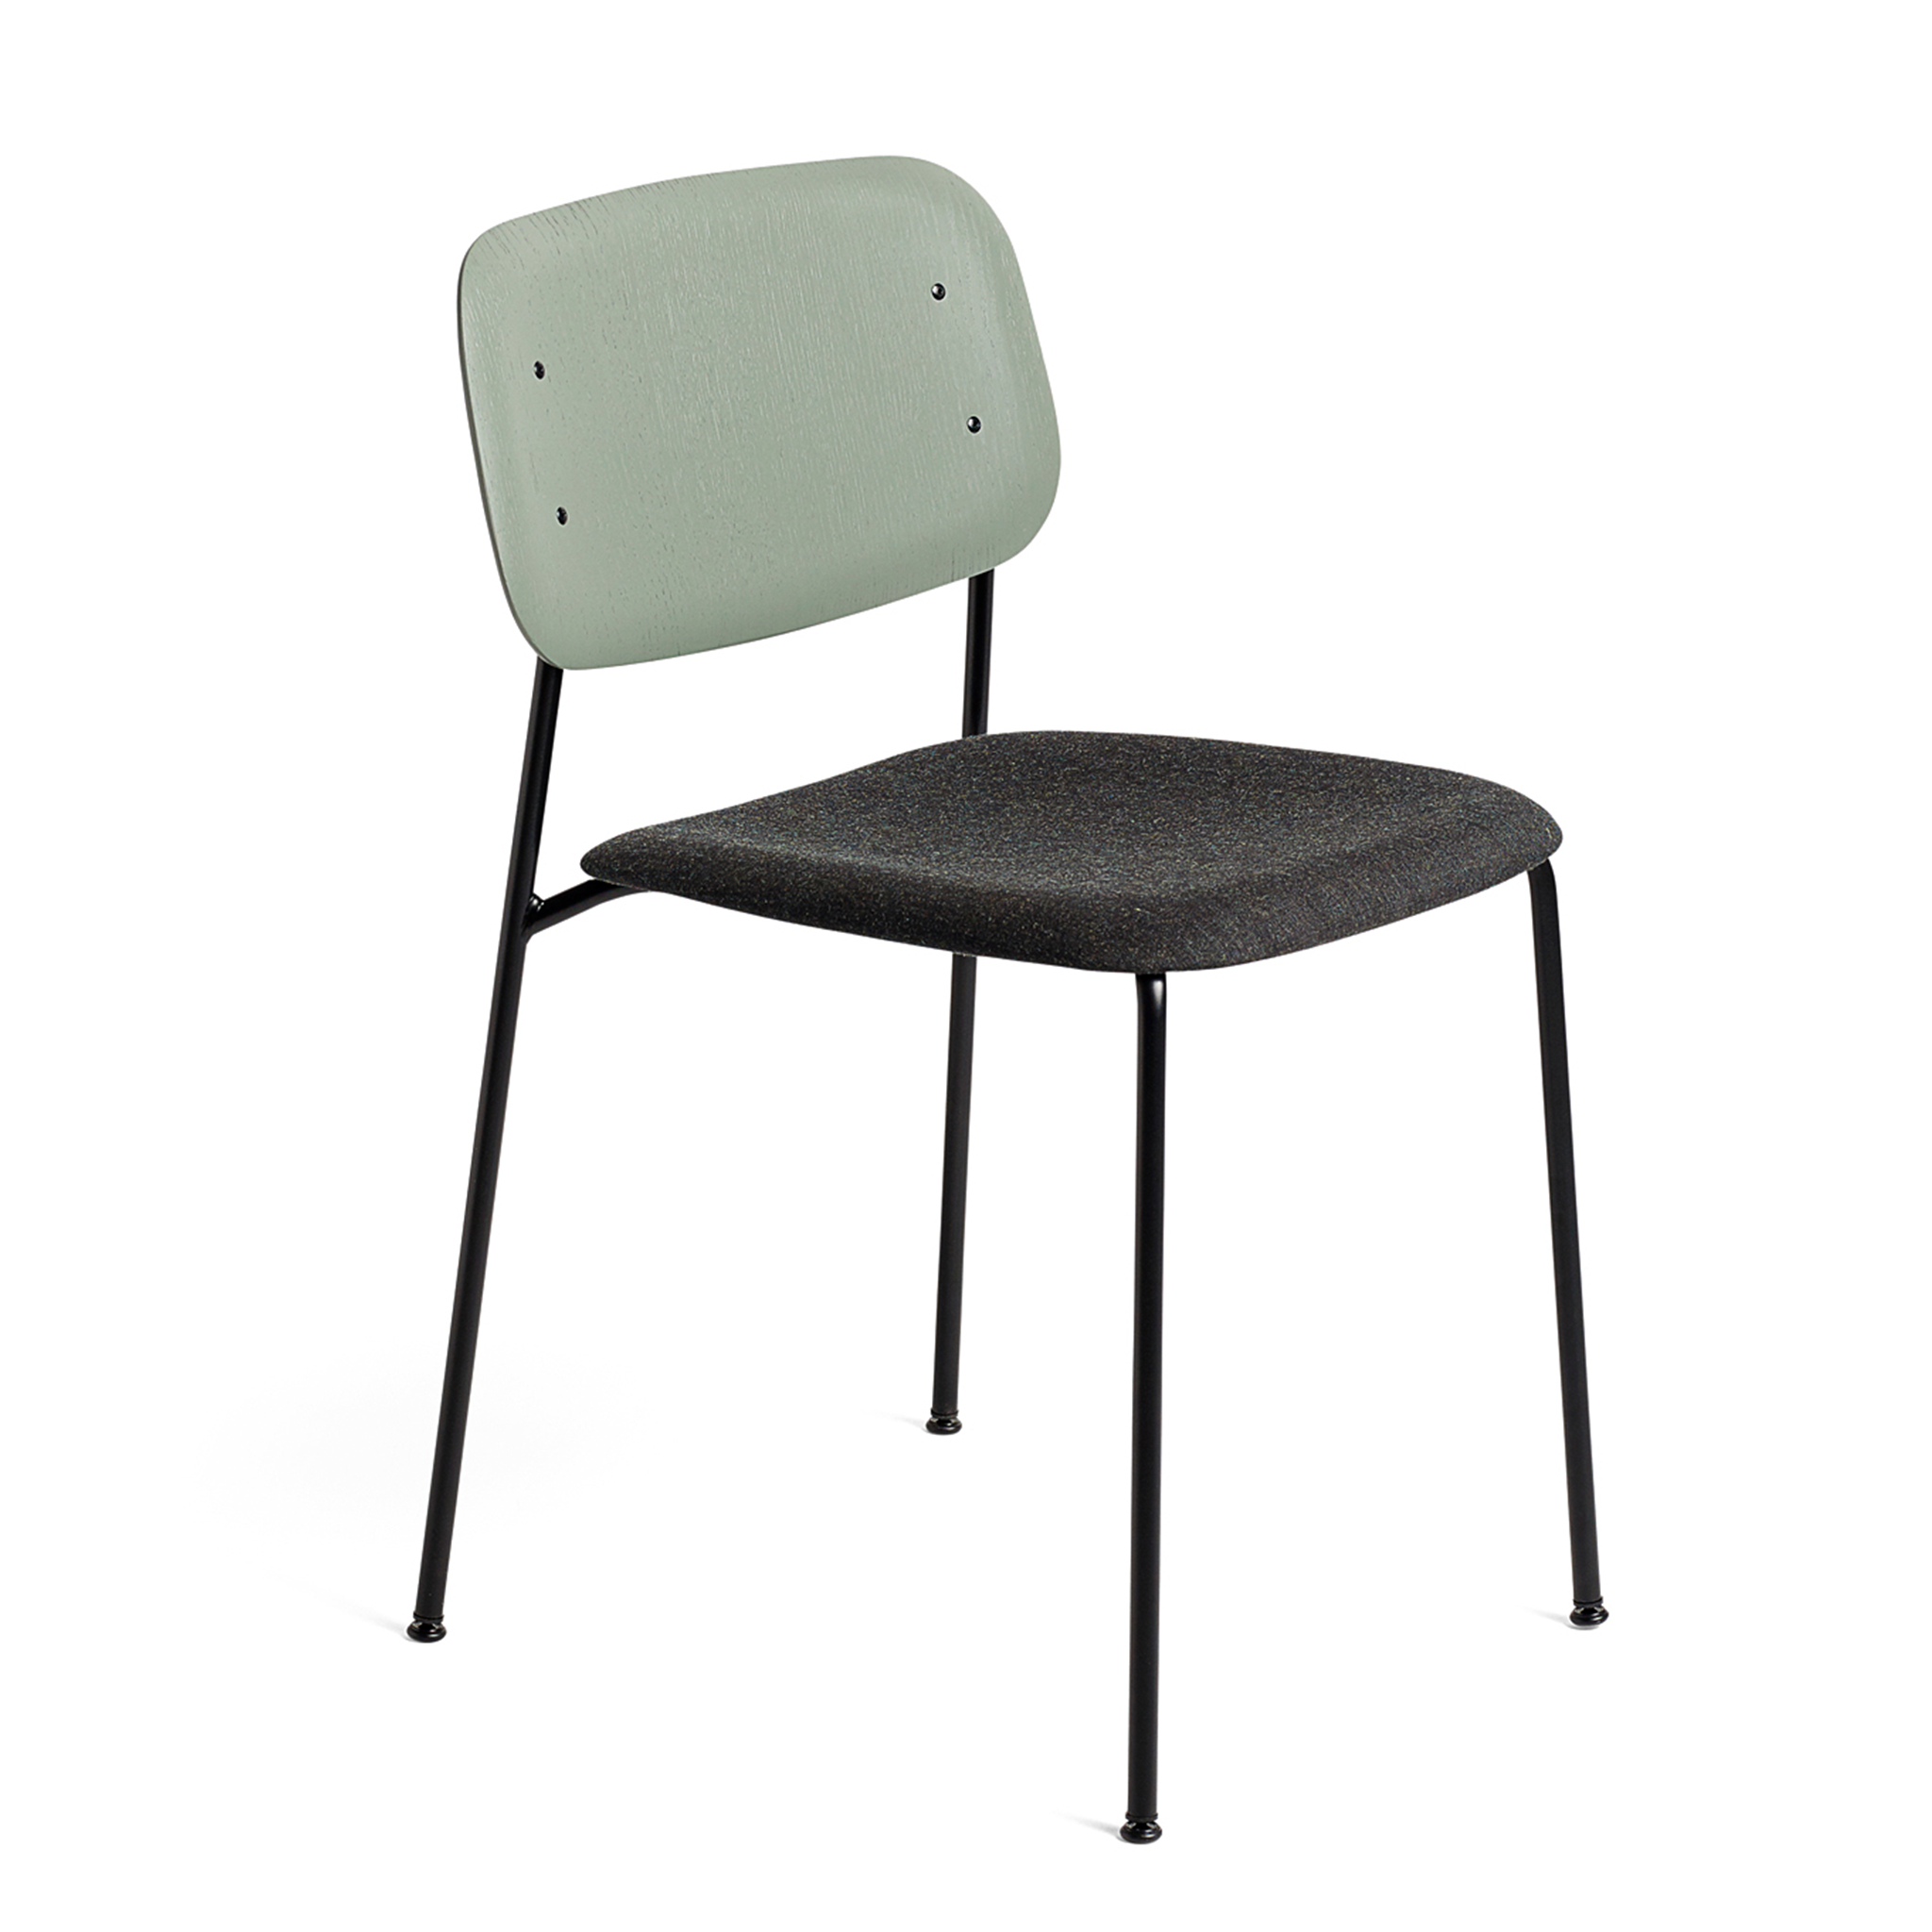 Soft Edge 10 Chair Upholstered by Hay